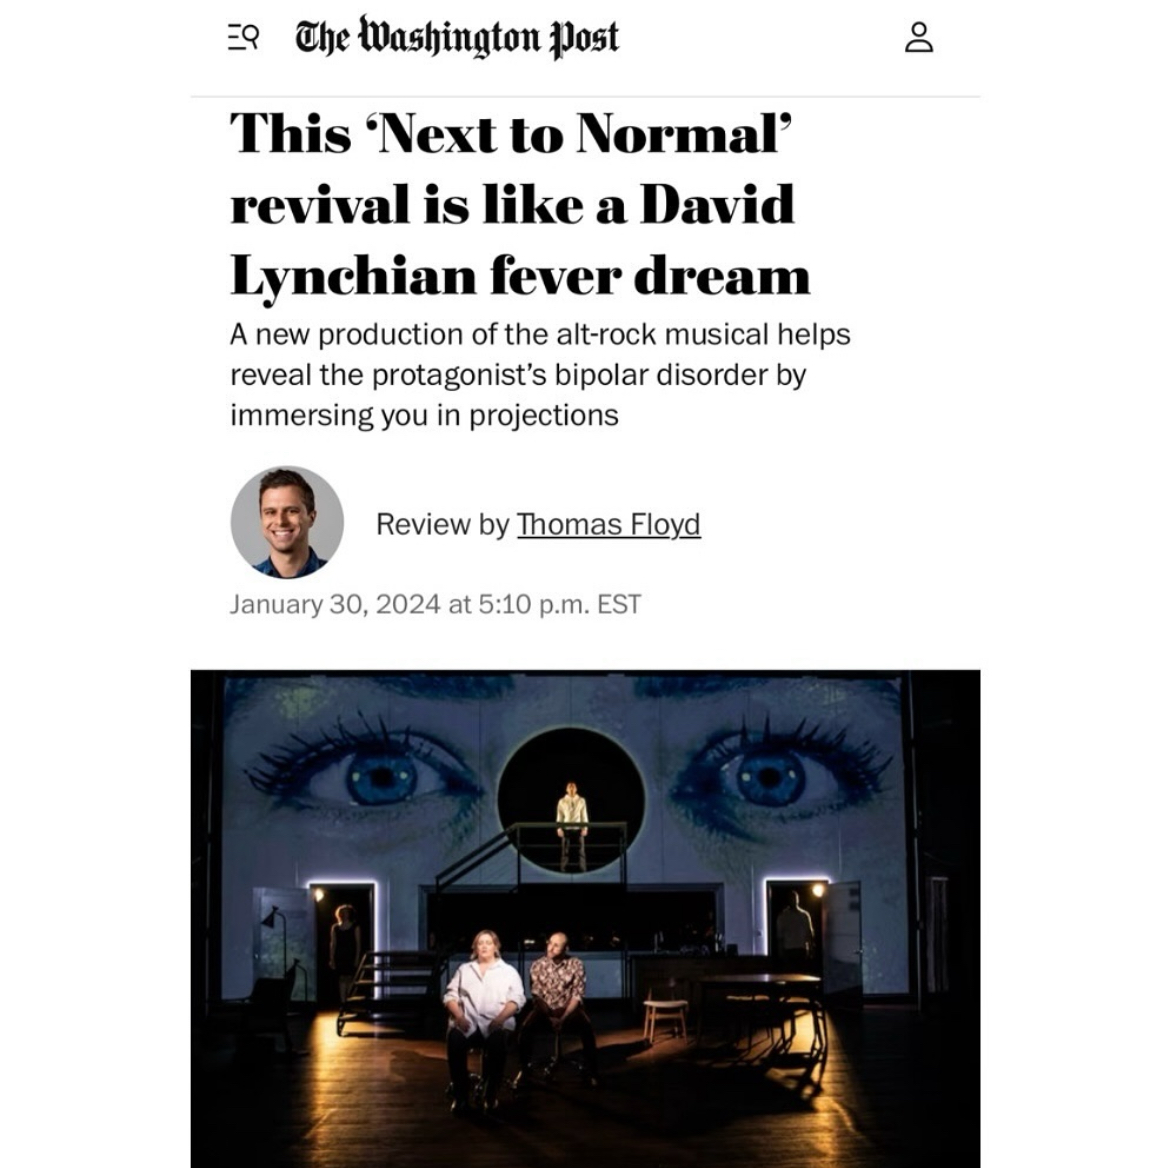 Washington Post Review: This 'Next to Normal' revival is like a David Lynchian fever dream